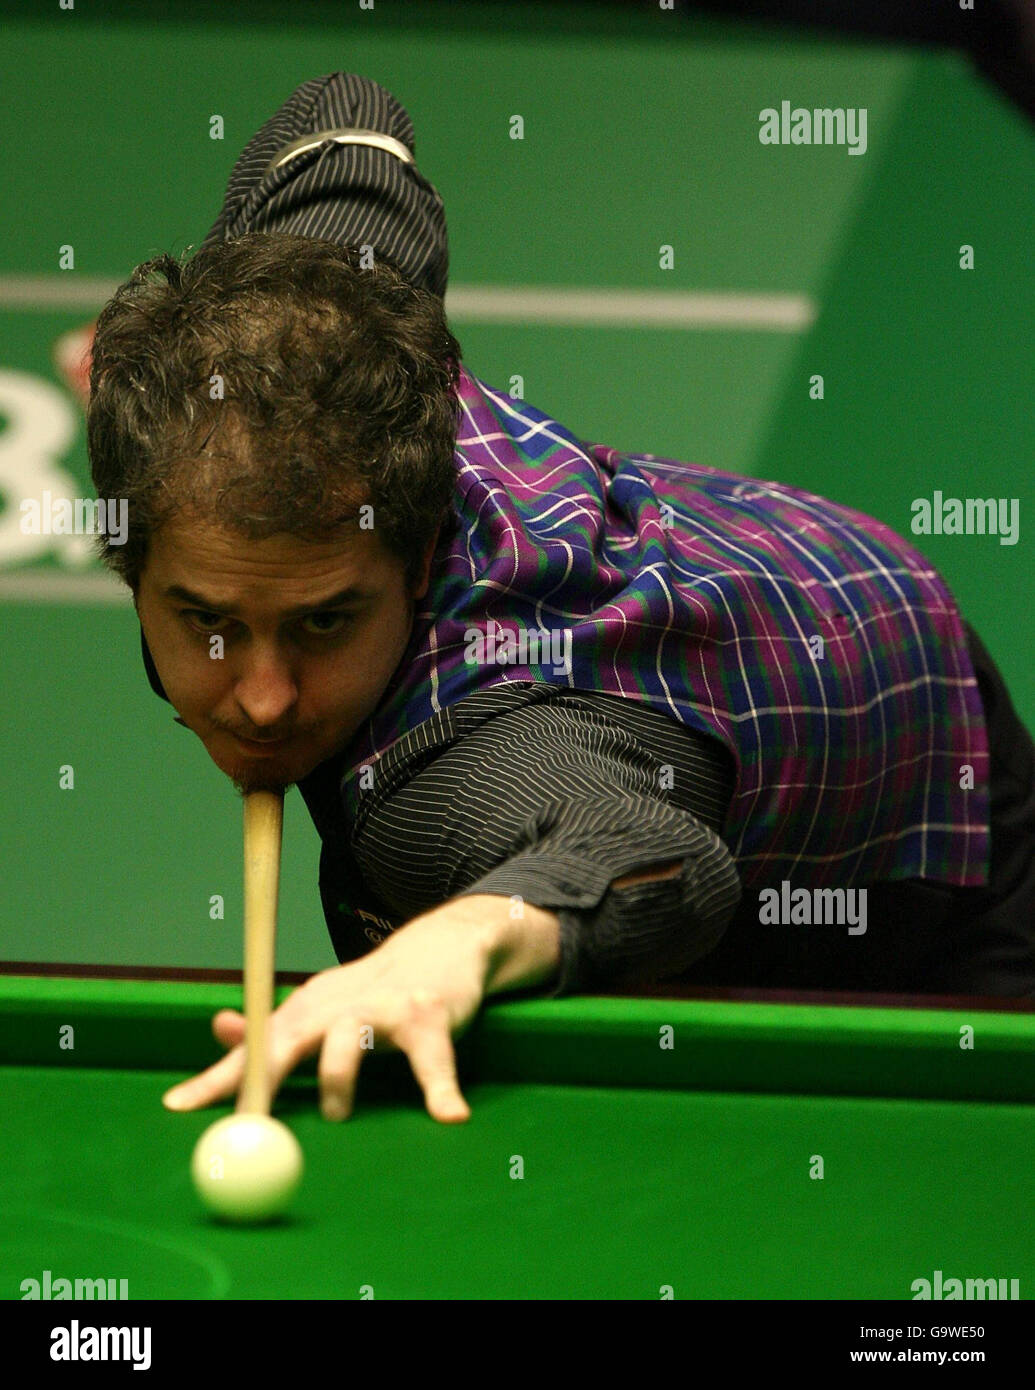 Anthony Hamilton in action against Ian McCulloch during the first round match of the World Snooker Championships at the Crucible Theatre, Sheffield. Stock Photo